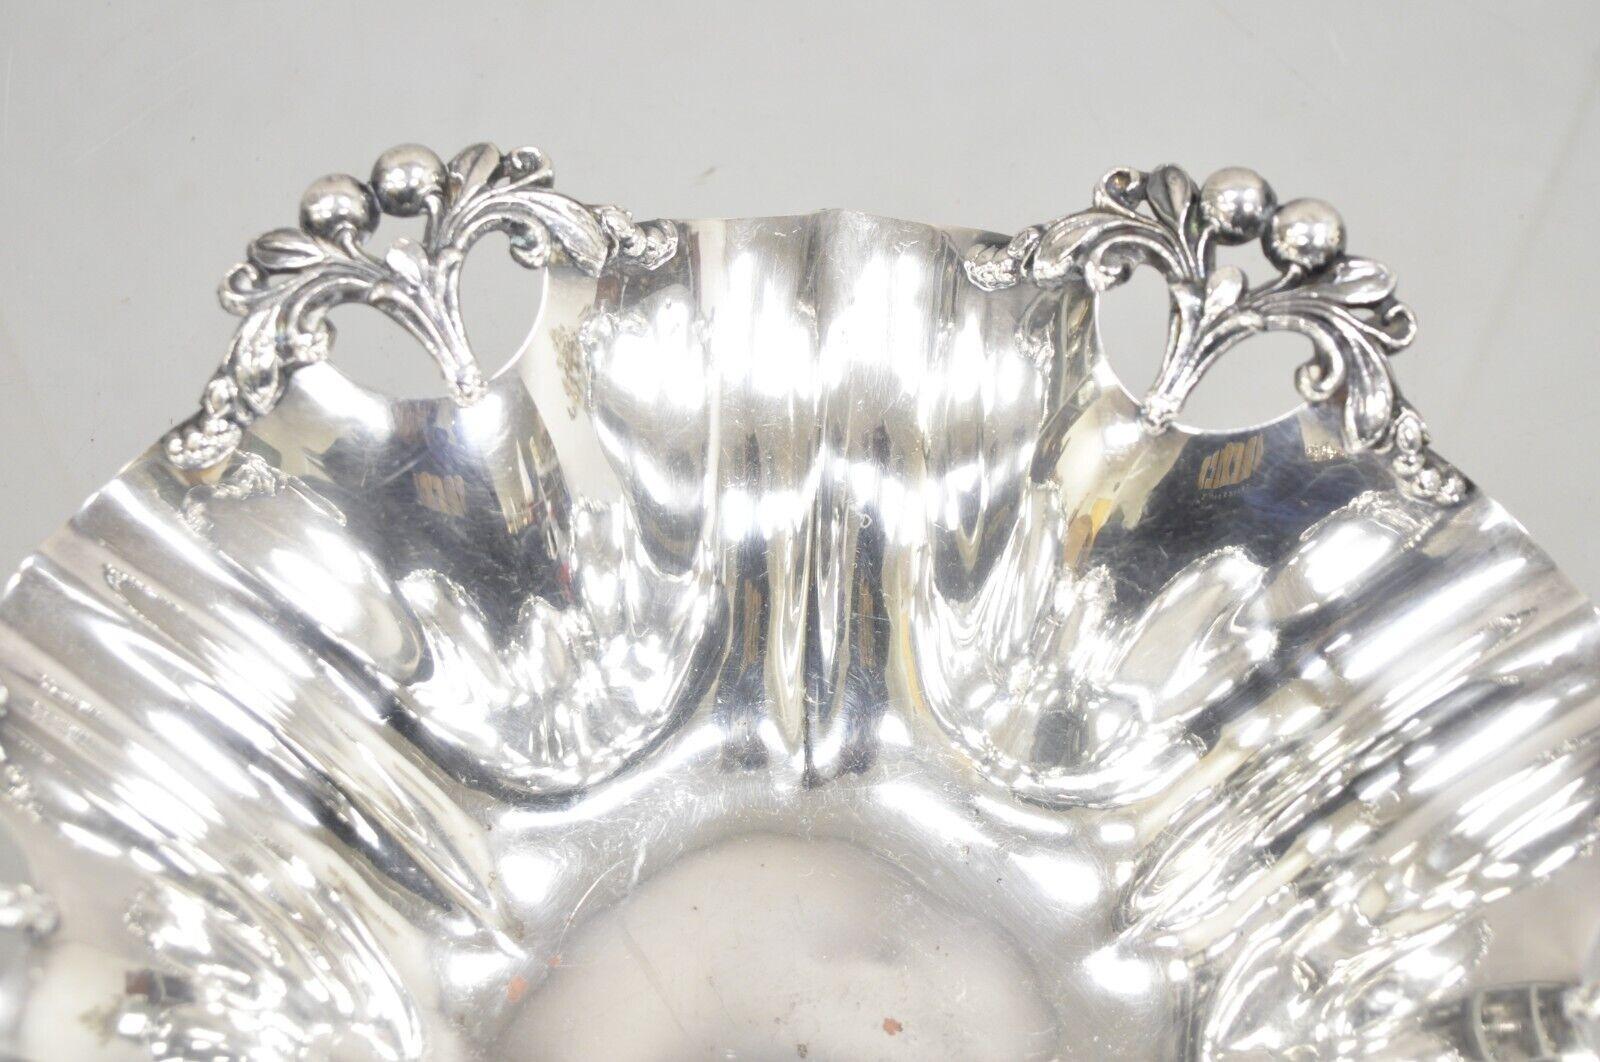 20th Century Vintage Victorian Silver Plated Handkerchief Candy Dish Fruit Bowl Berry Design For Sale